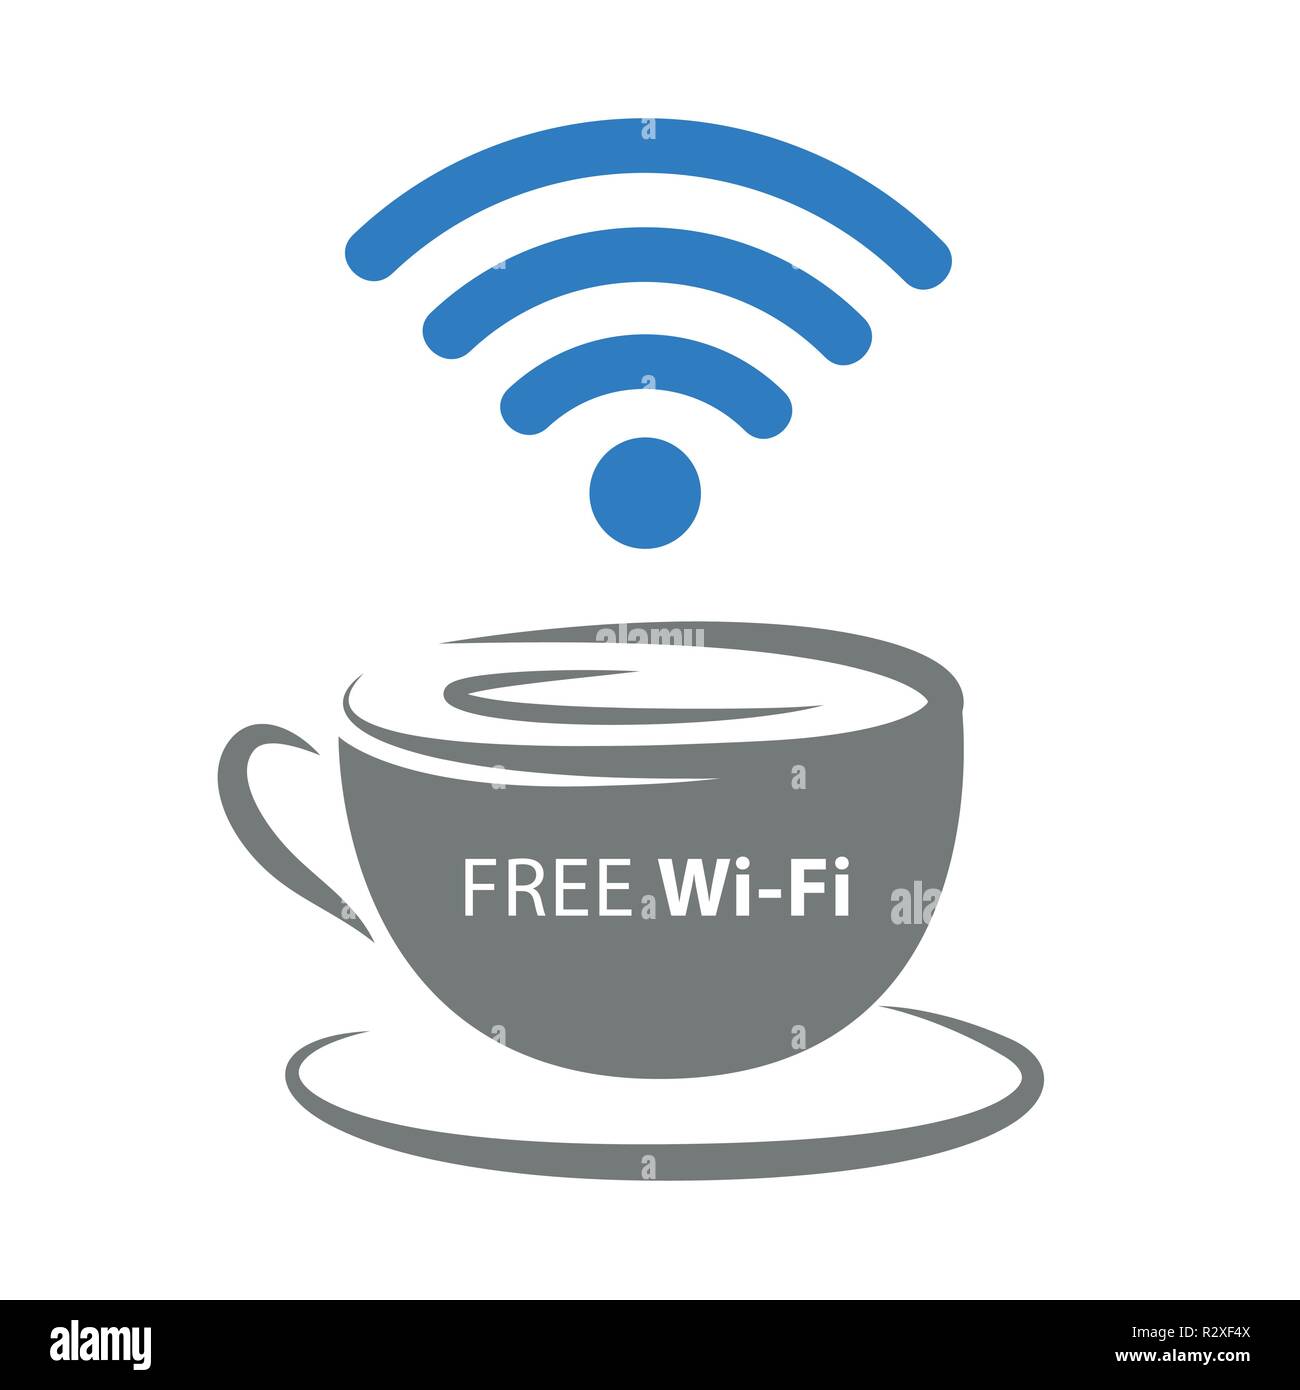 free Wi-Fi zone icon with coffee cup and blue wireless signal vector illustration EPS10 Stock Vector